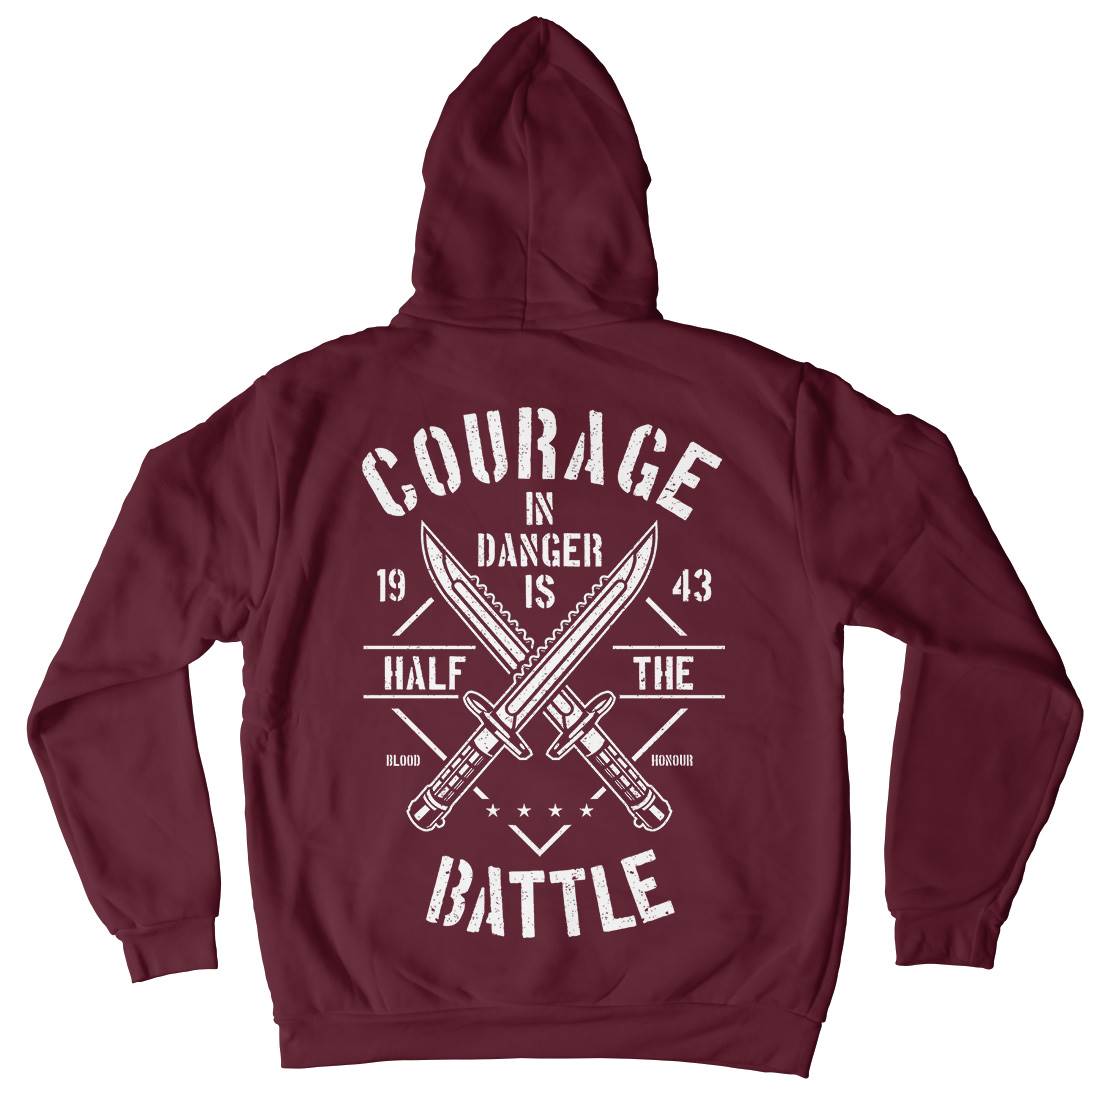 Courage In Danger Kids Crew Neck Hoodie Army A639